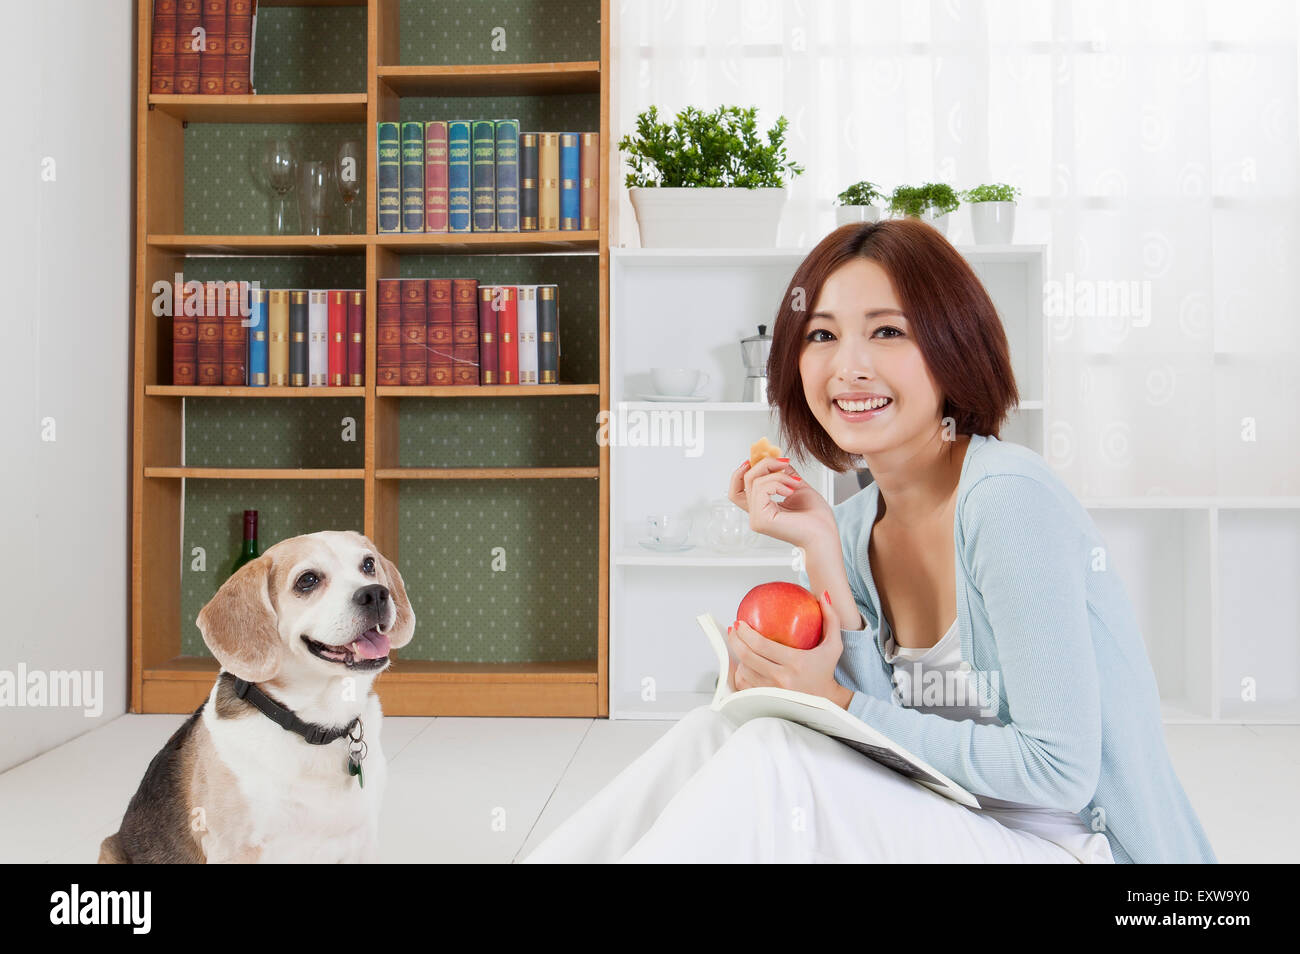 Young woman sitting with her dog and holing an apple with smile, Stock Photo